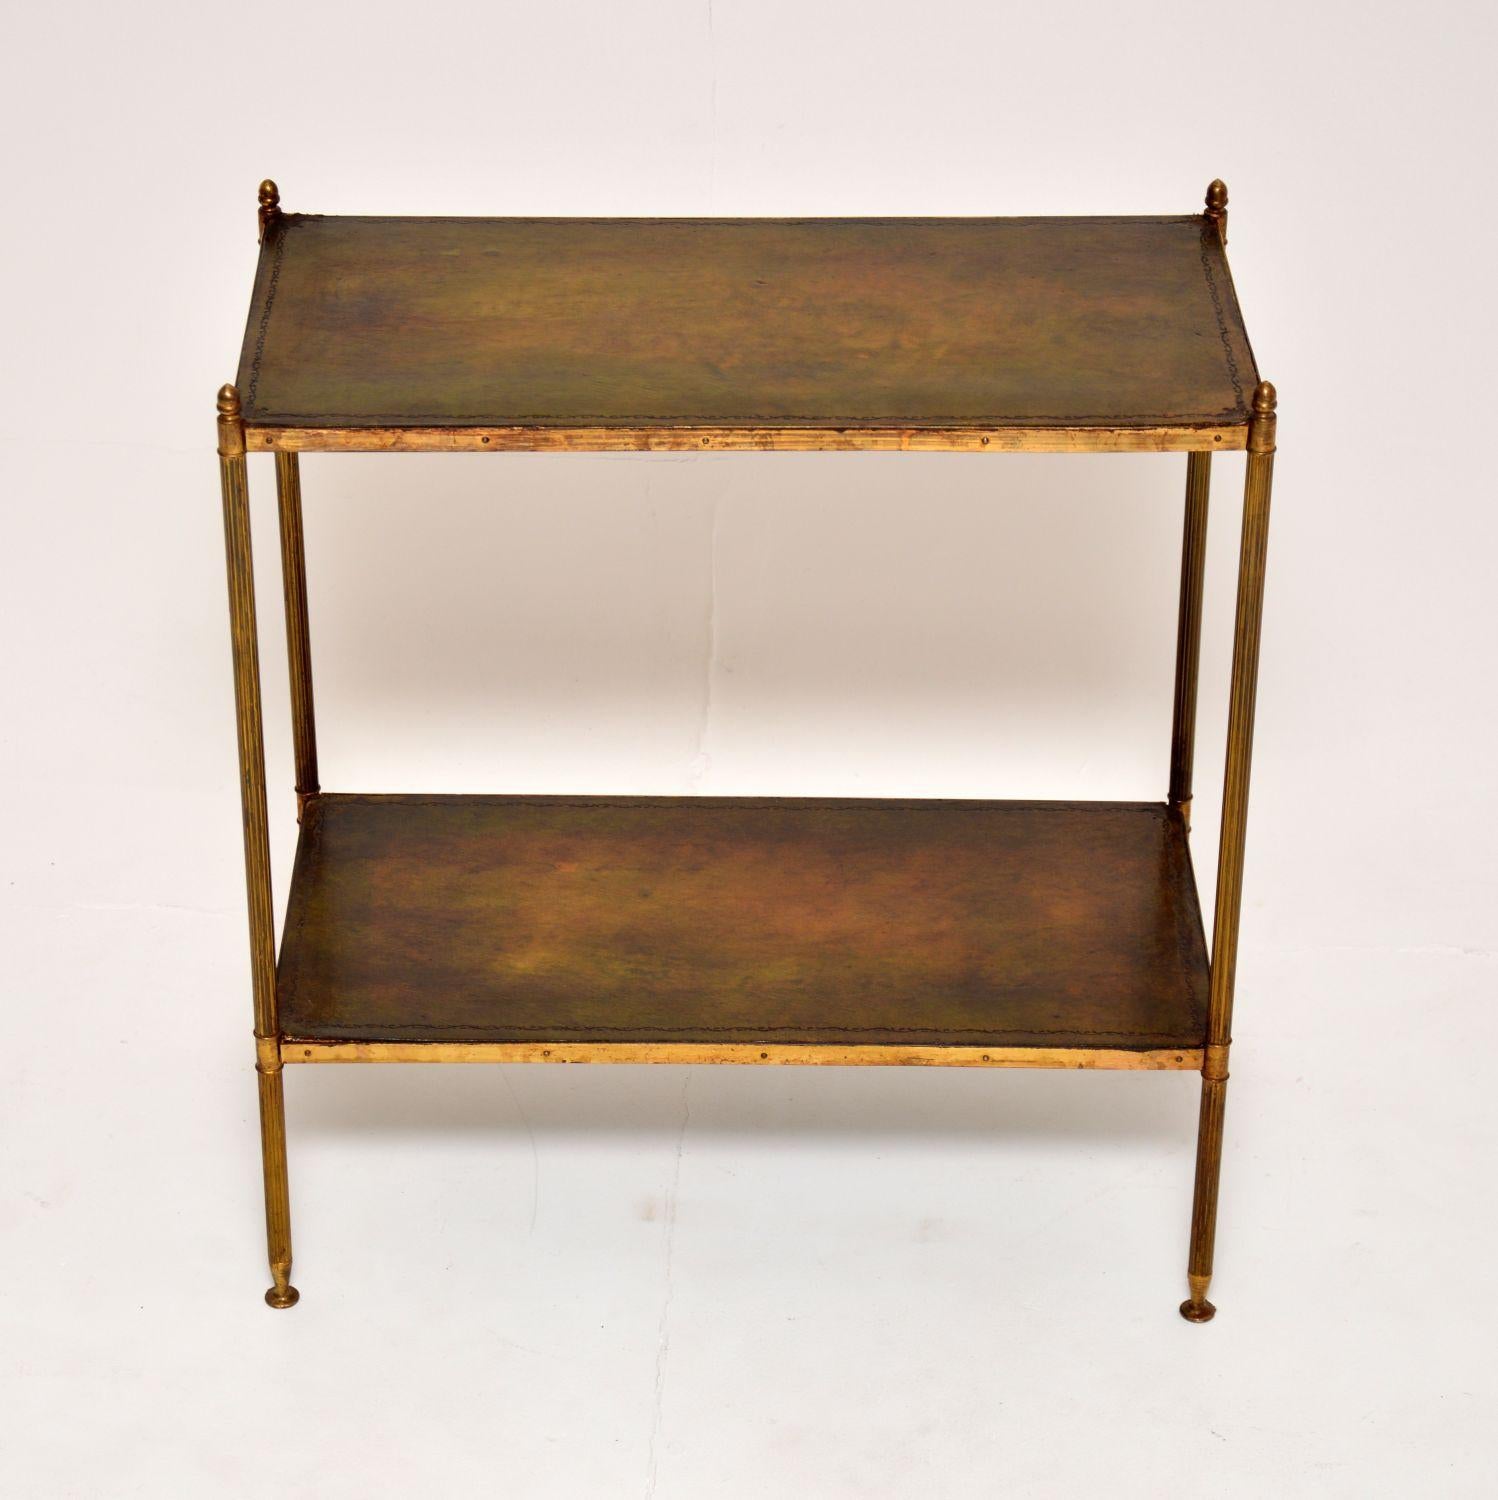 Neoclassical Antique French Brass & Leather Side Table / Etagere